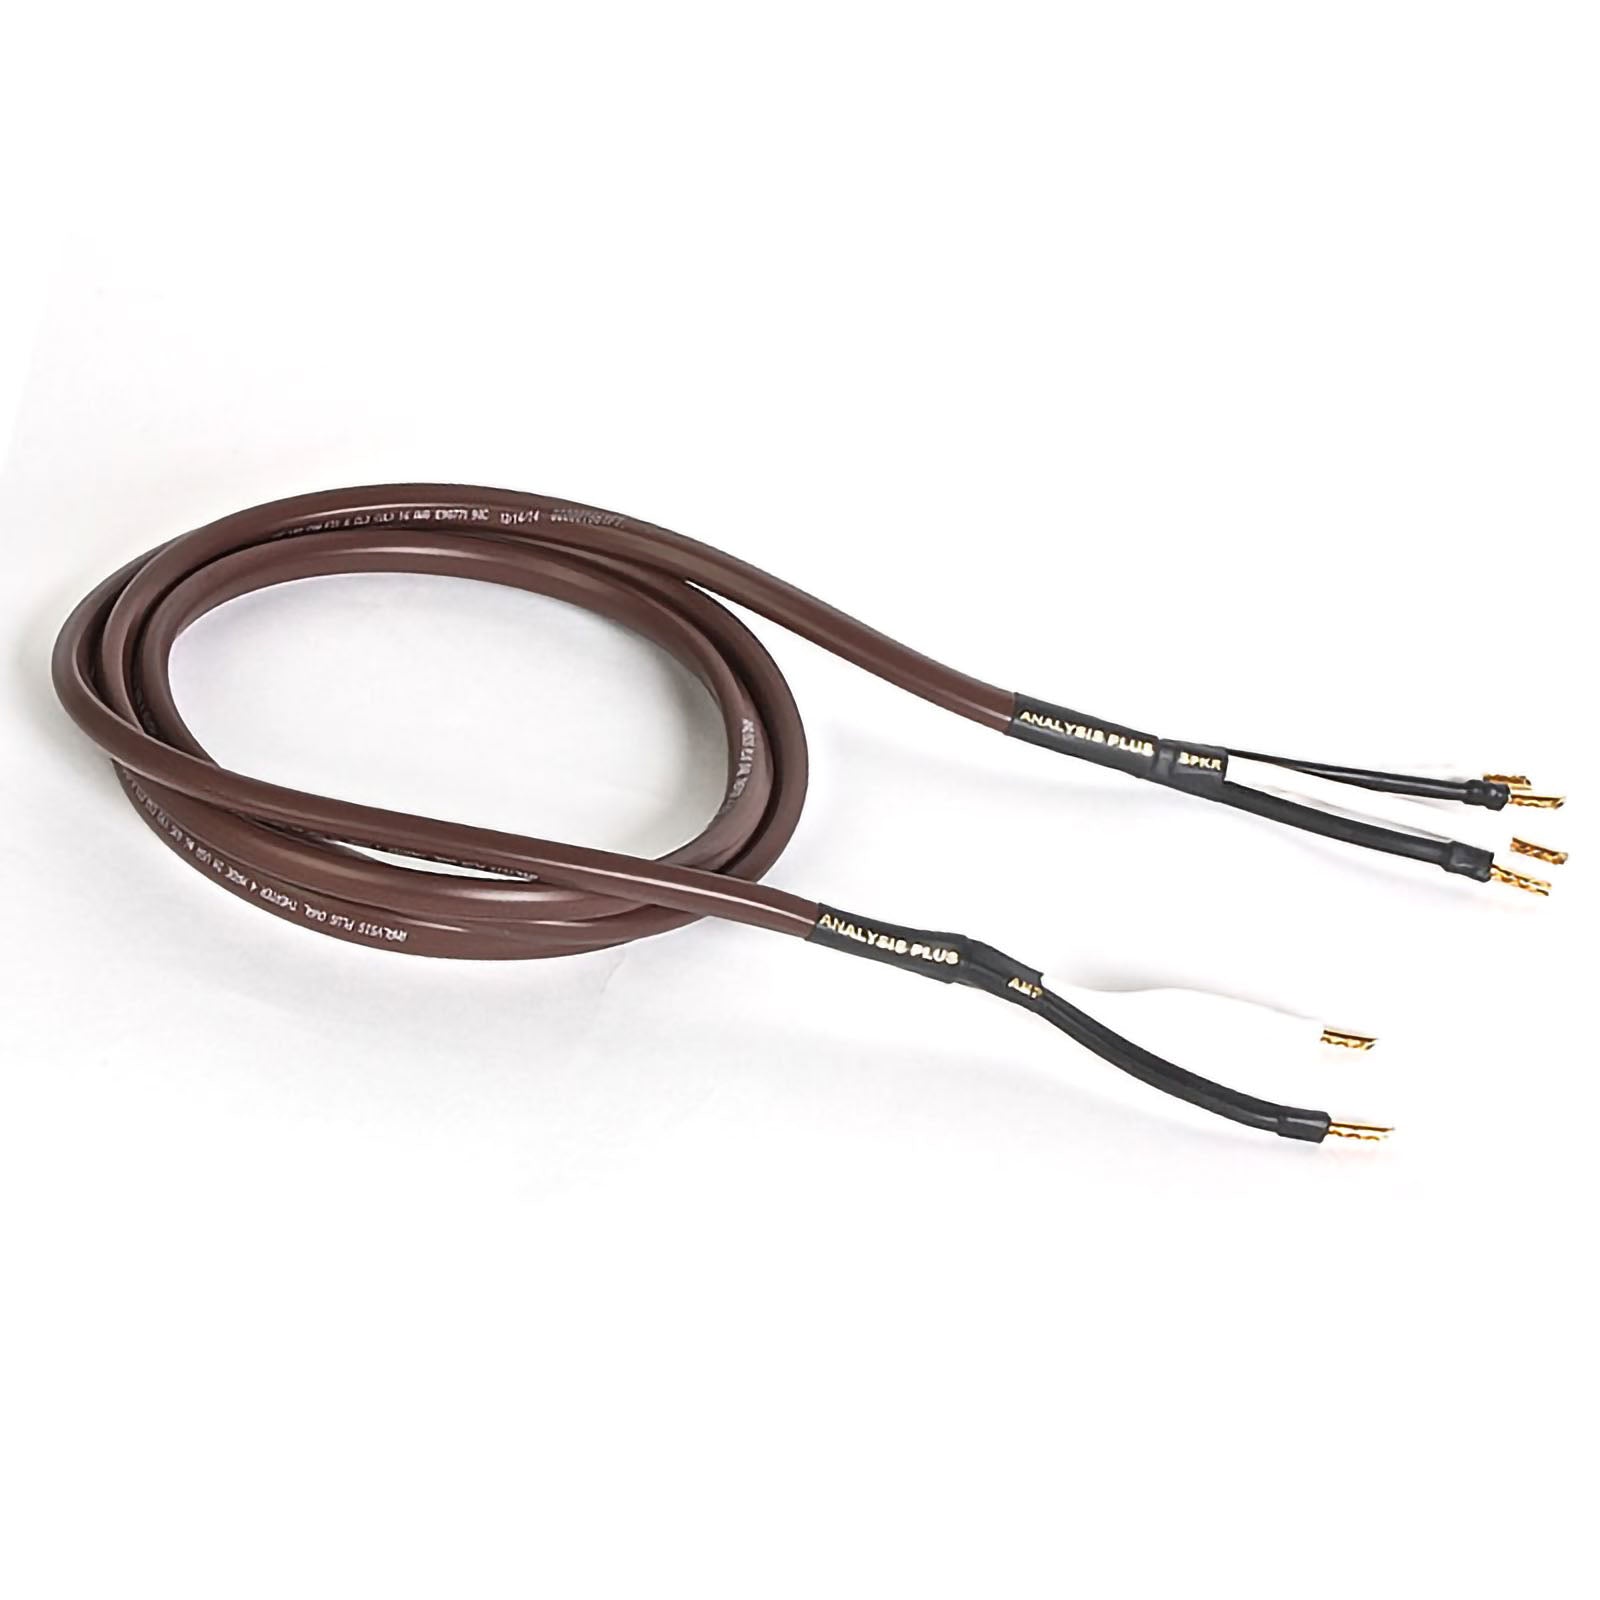 Analysis Plus Chocolate Theater 4 Speaker Cable